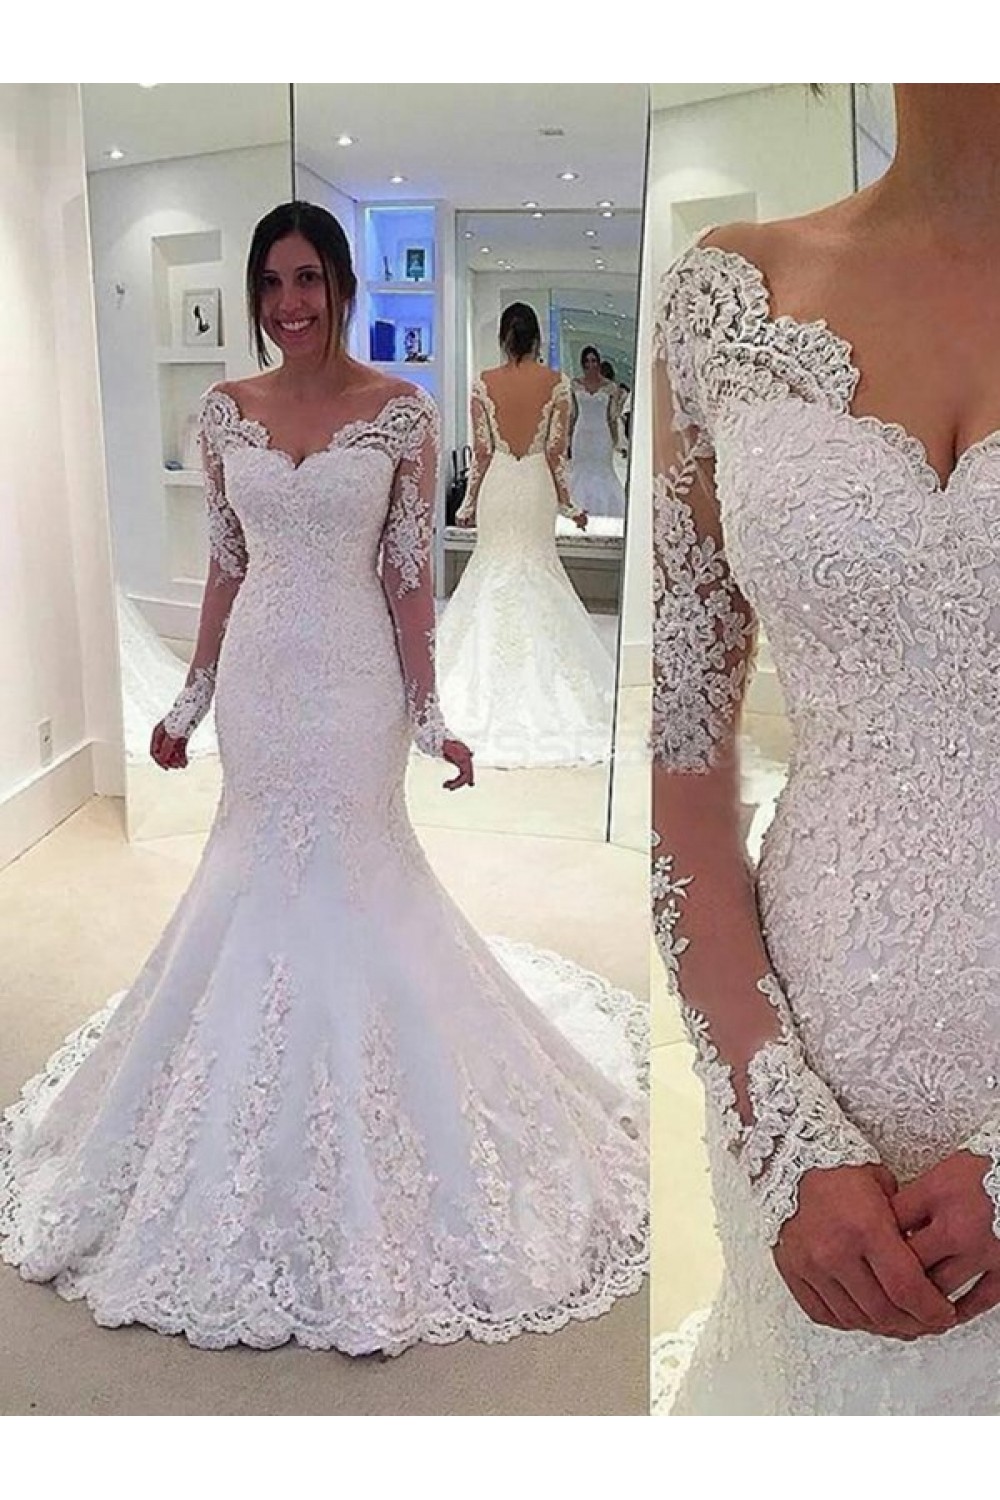 Lace Long Sleeves Mermaid Backless Wedding Dresses Bridal Gowns 3030093 7073